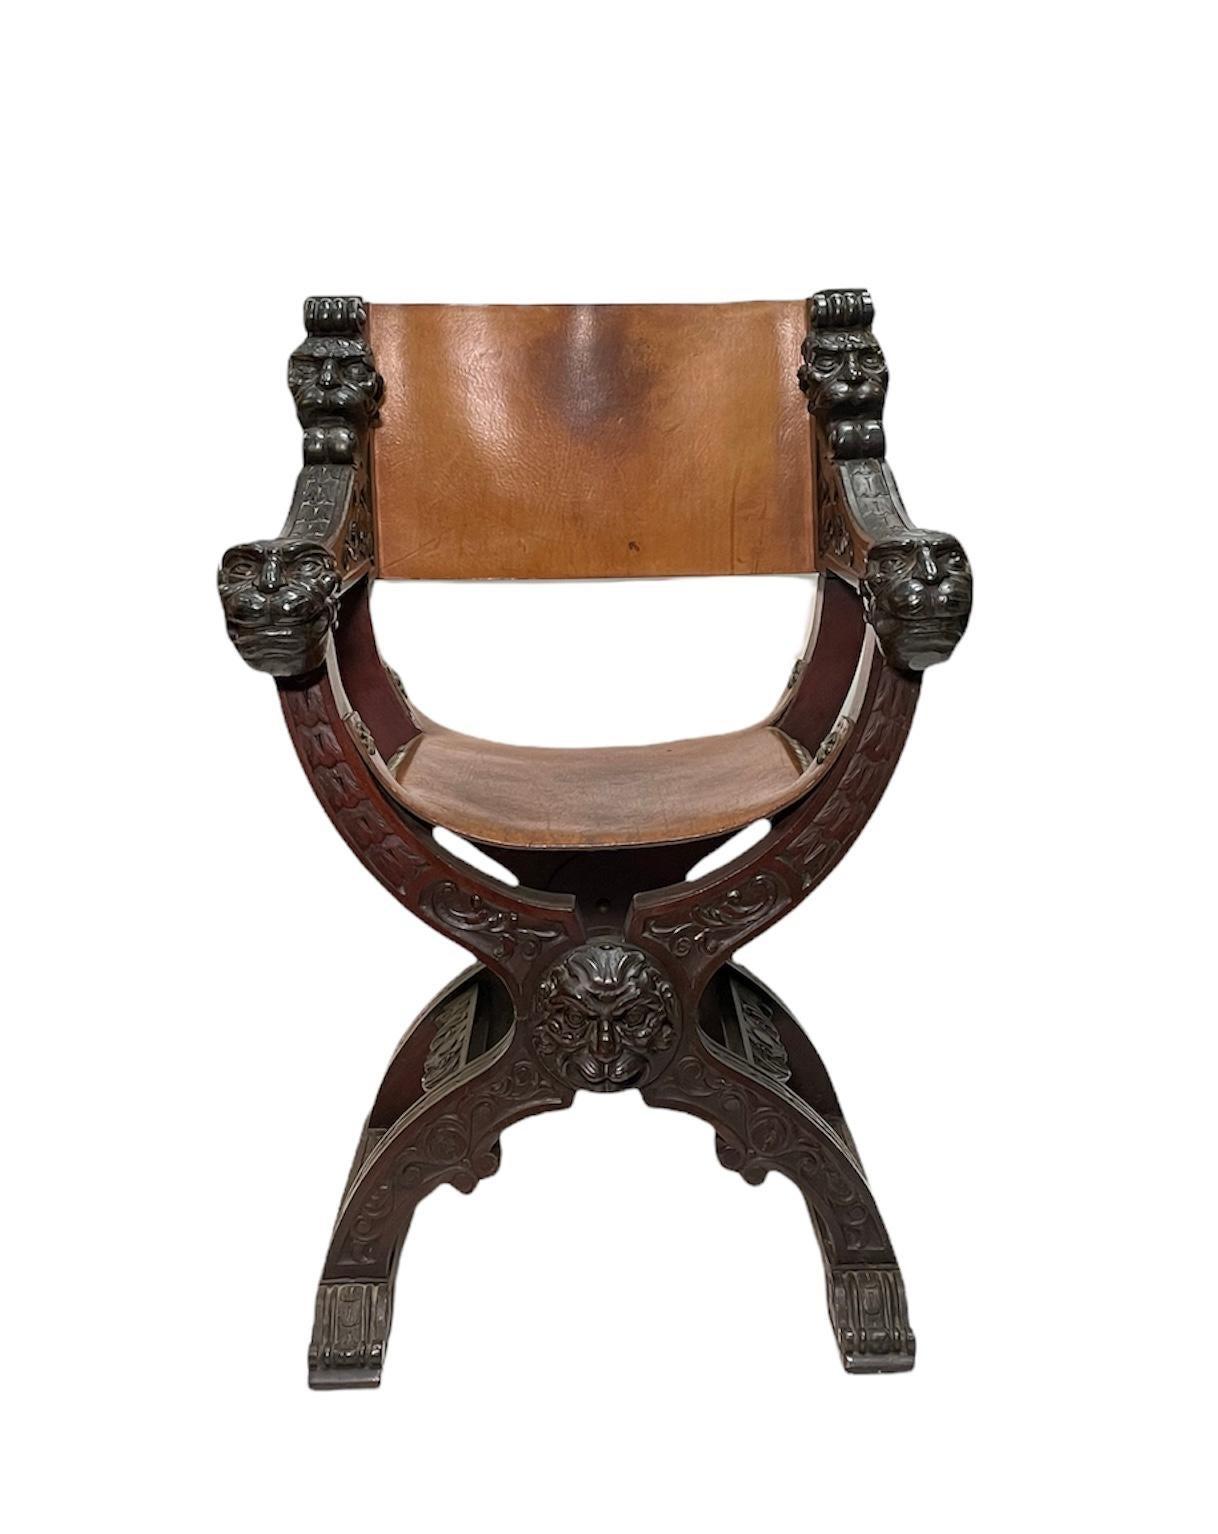 This is a Dante or Savonarola wood and leather heavy chair. This is an X- shaped frame chair. The whole chair is decorated with a very detailed carving of a mix of a lion-man face head masks in the rest arms, back and in the frontal center of the